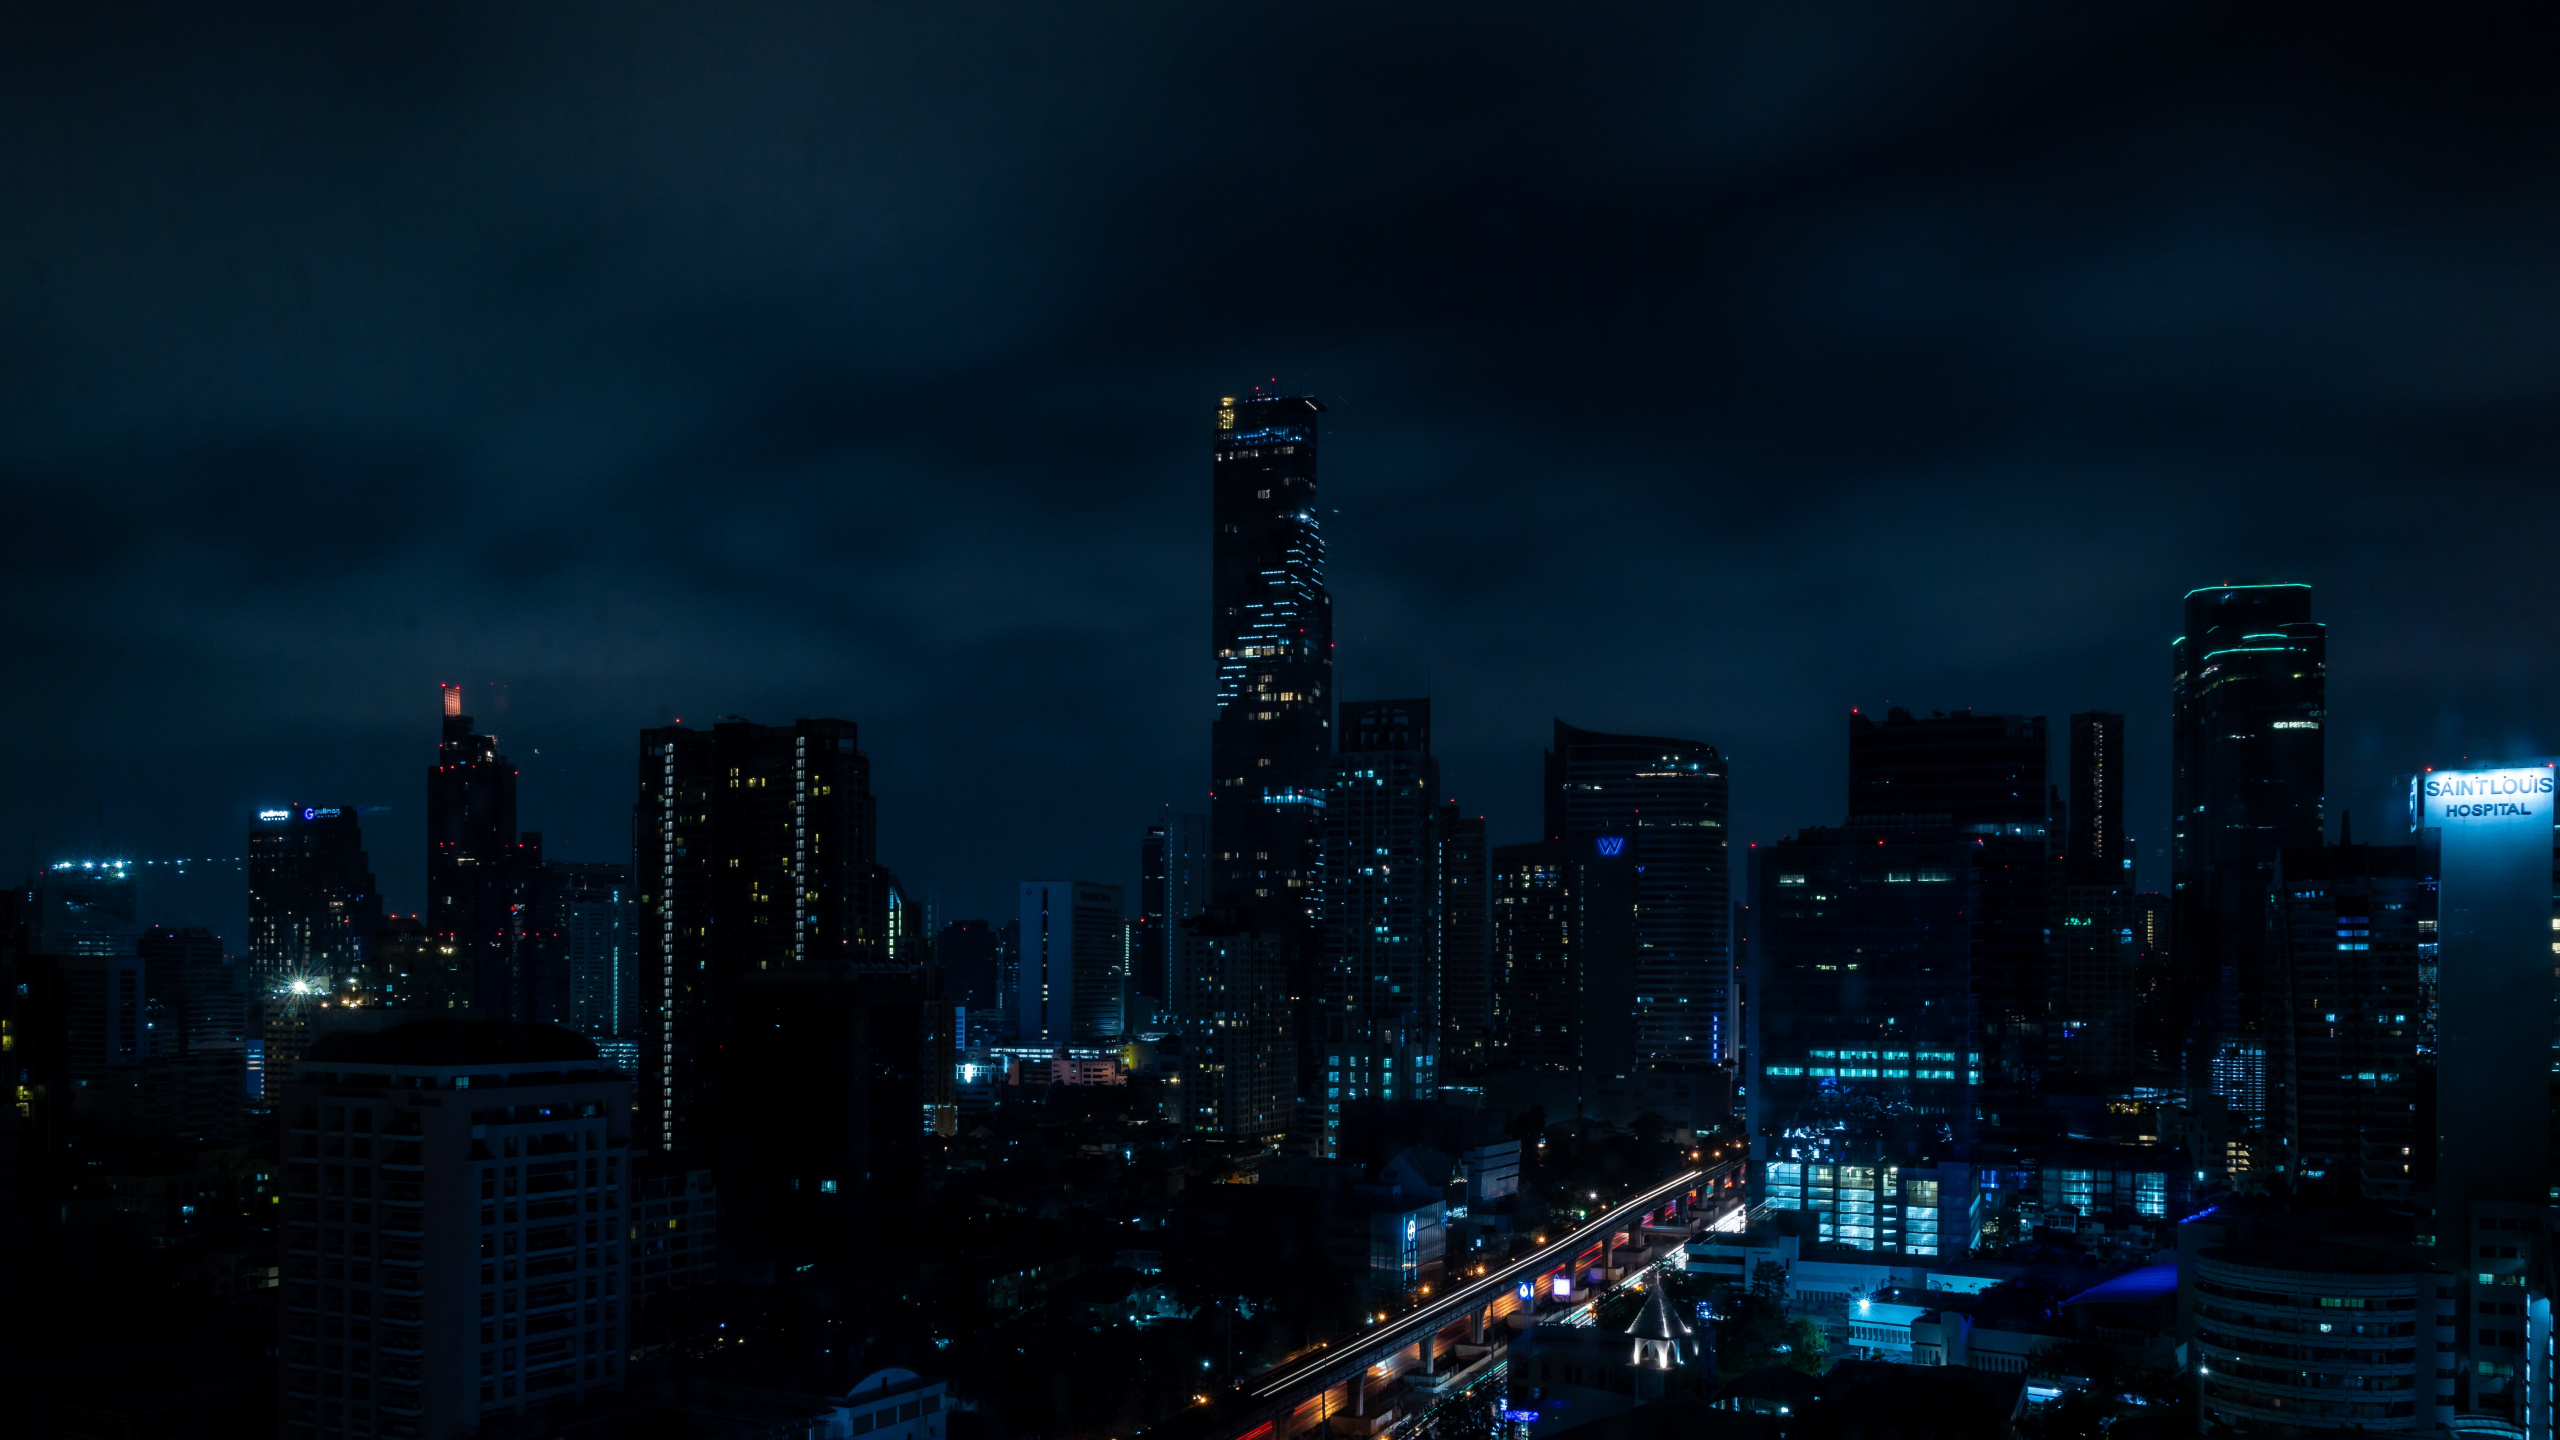 City Skyline During Night Time. Wallpaper in 2560x1440 Resolution